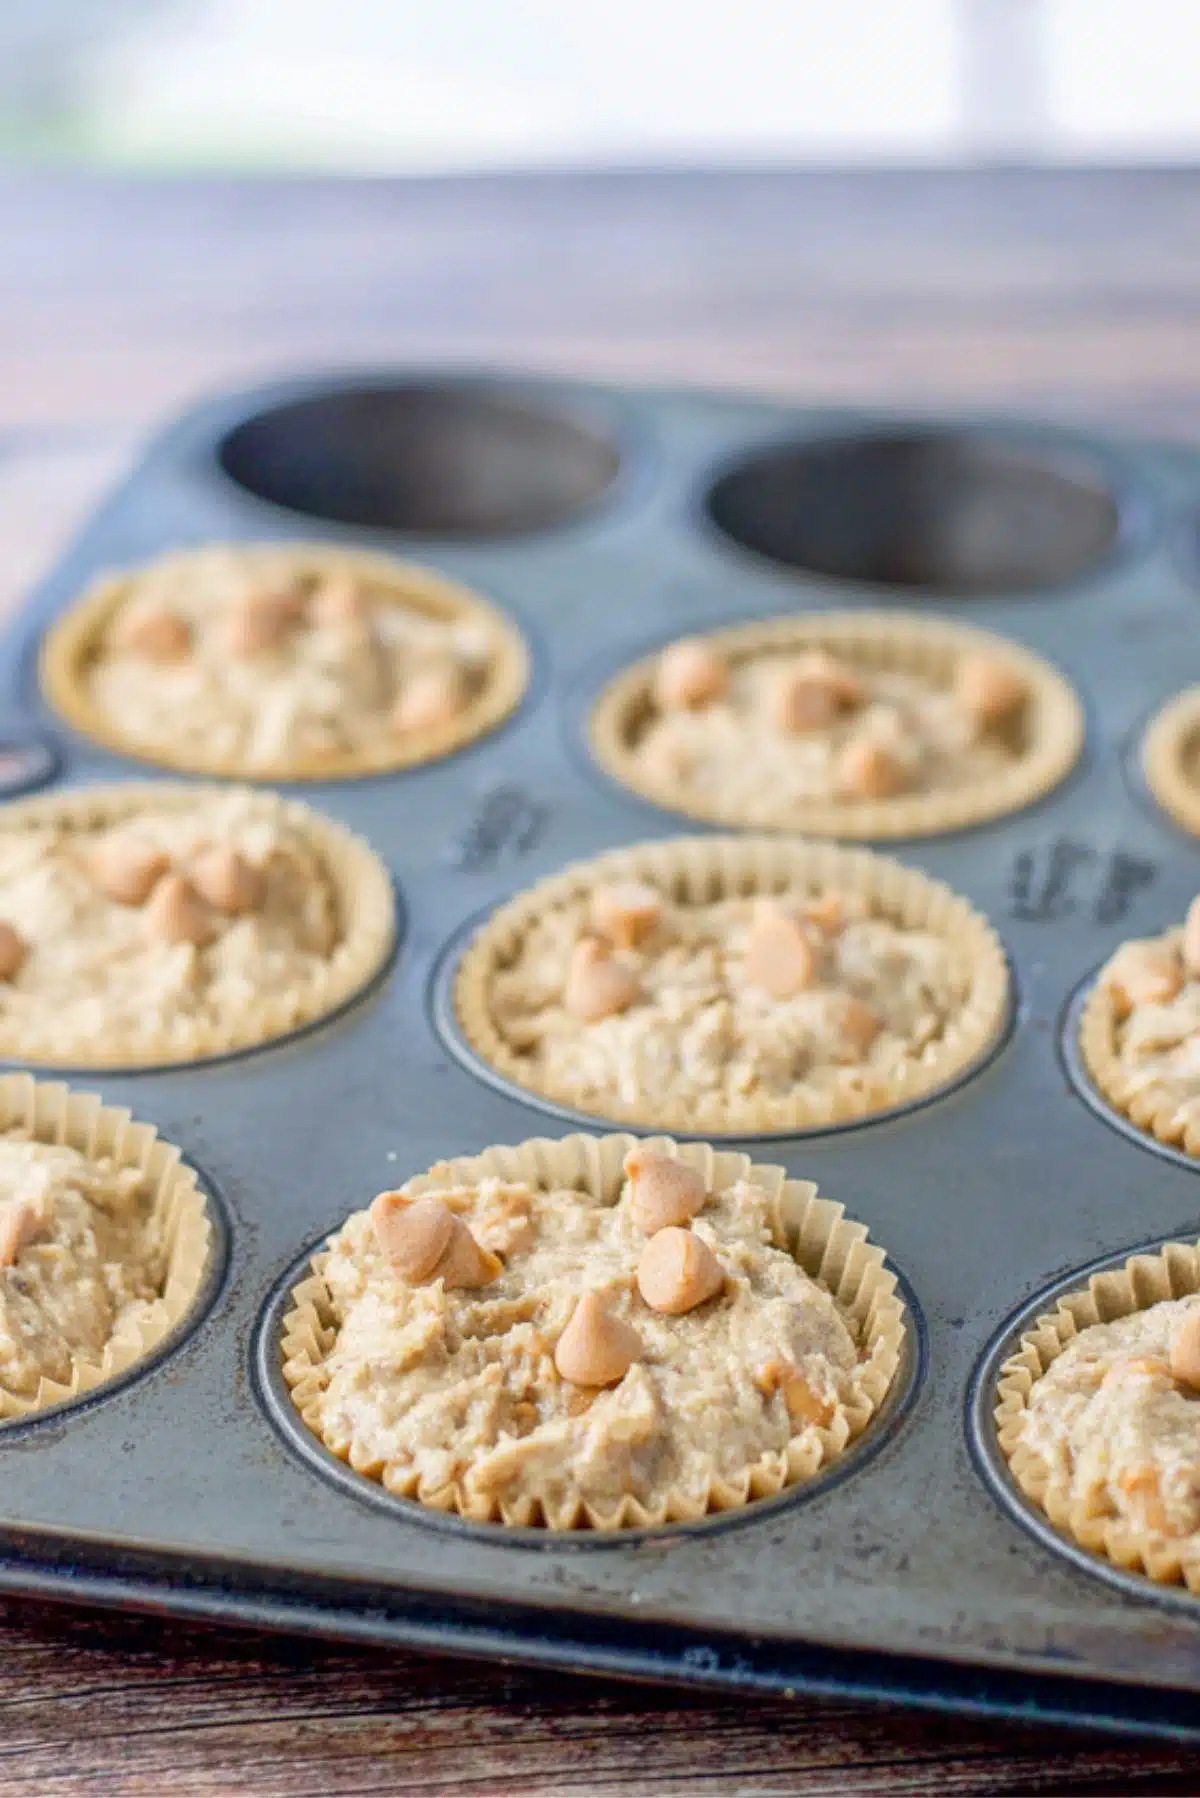 Muffins batter spooned into the muffin tin with butterscotch chips sprinkled on top